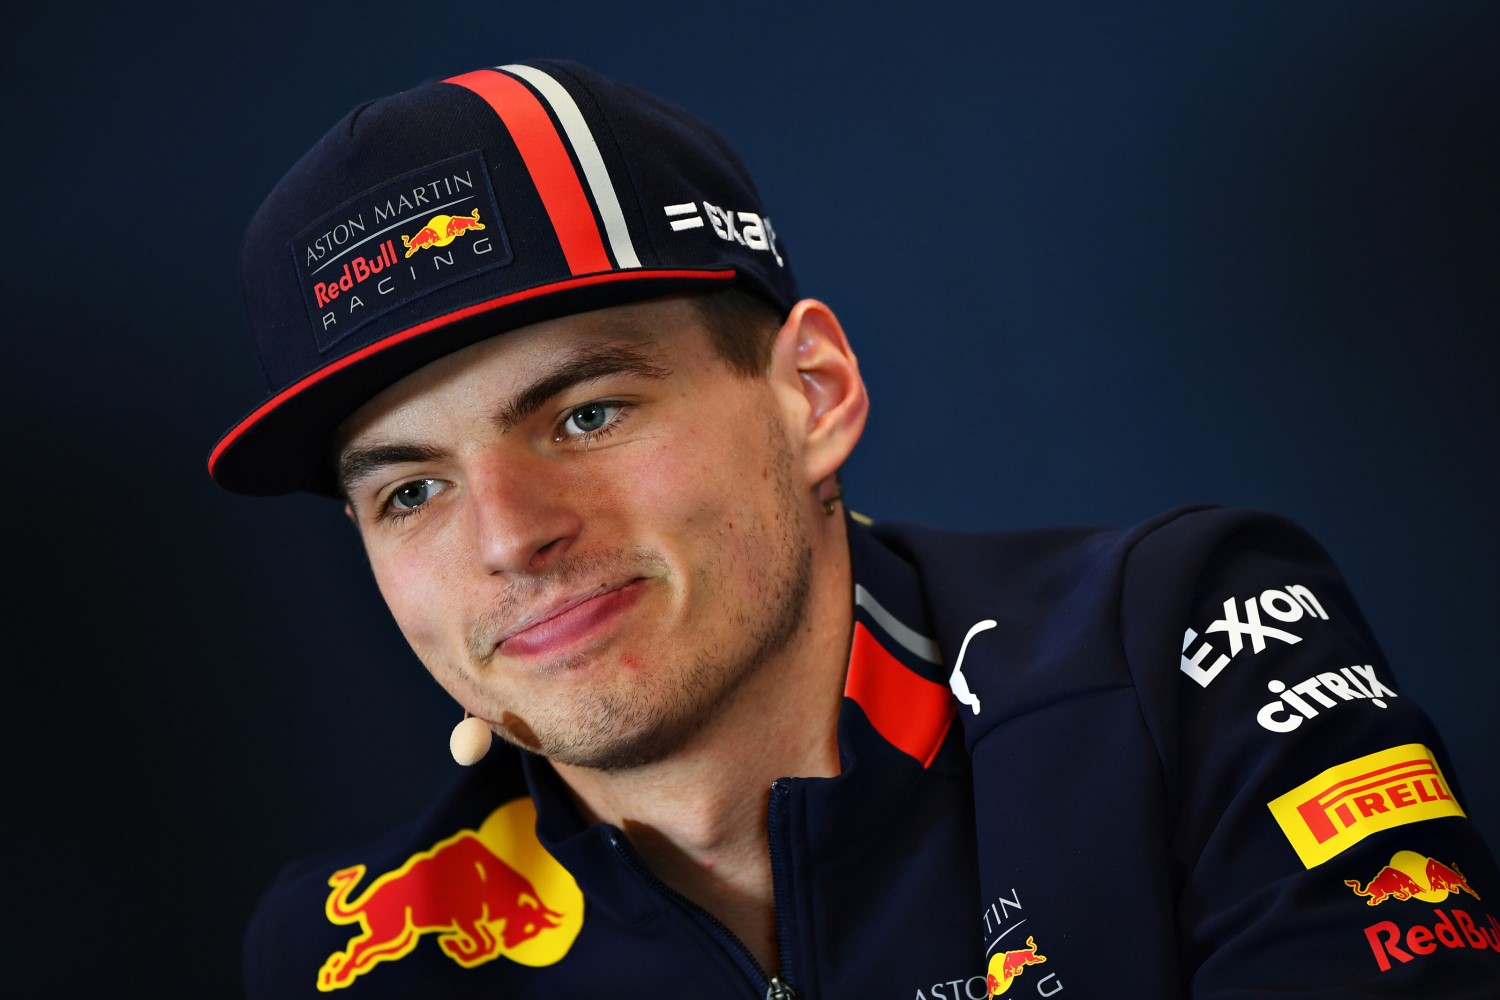 Verstappen was happy to be defended